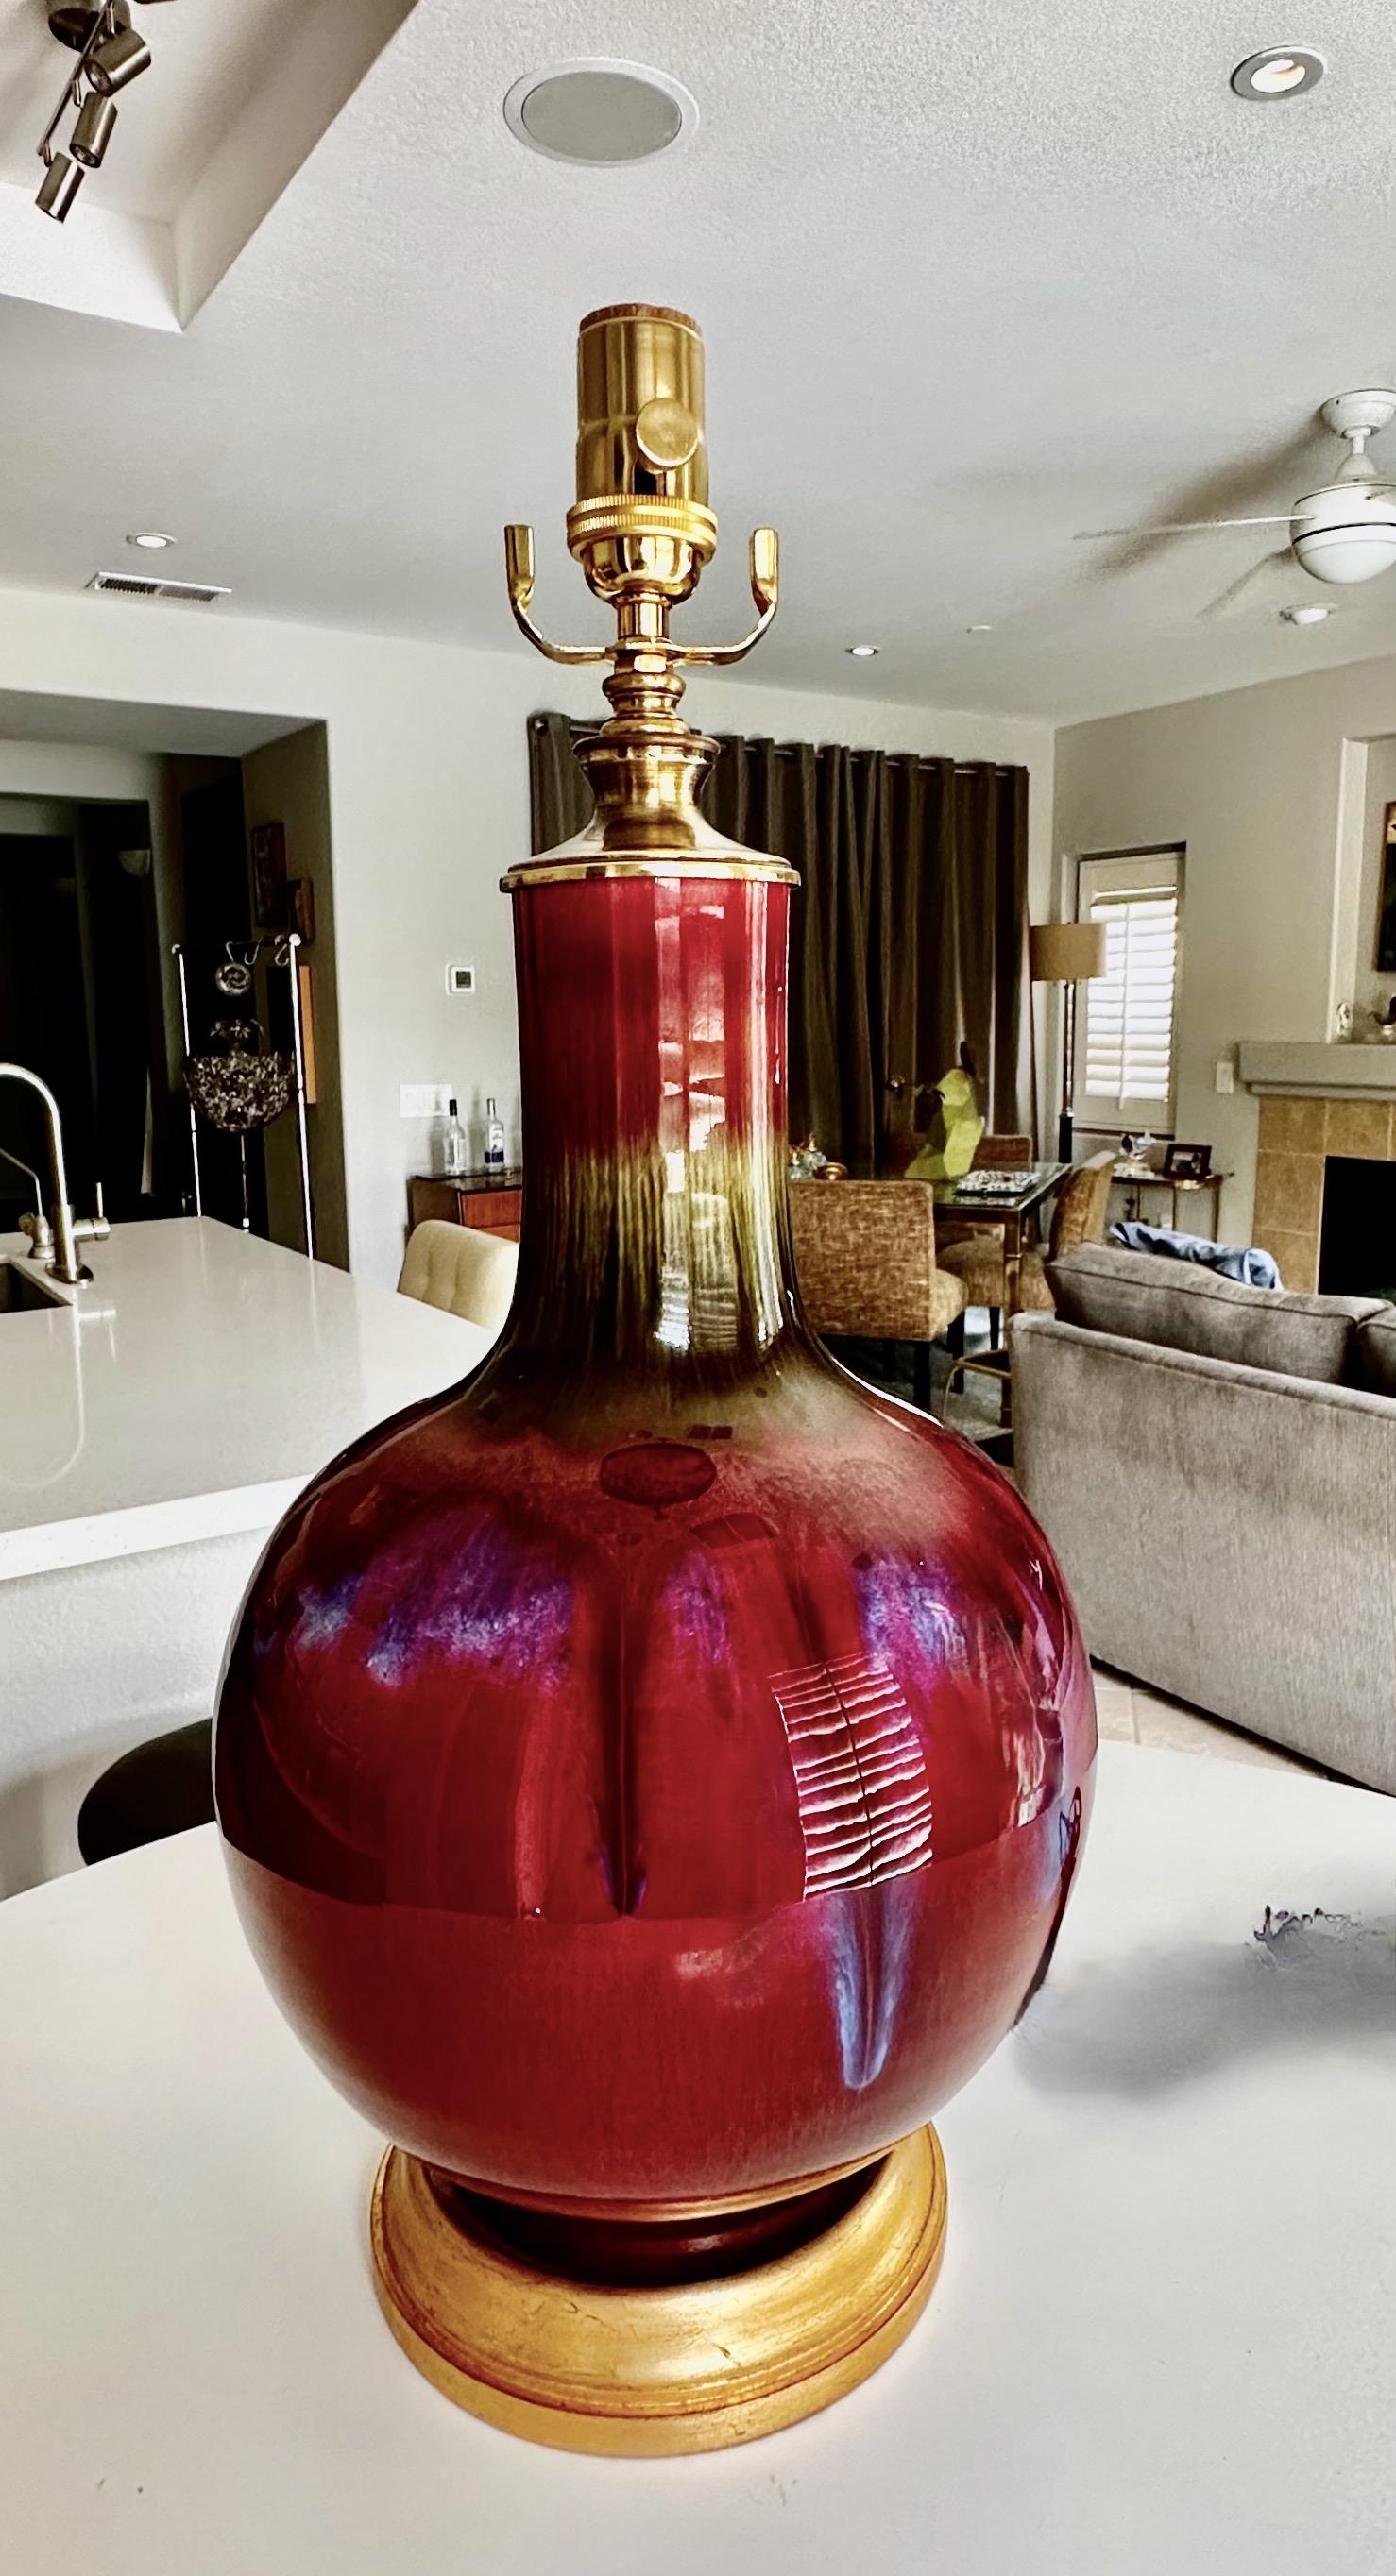 Single Chinese Asian Sang de Boeuf oxblood porcelain vase mounted on gilt turned wood lamp base by. Rewired with new 3 way brass socket and cord.
Measures: Height top of socket 21